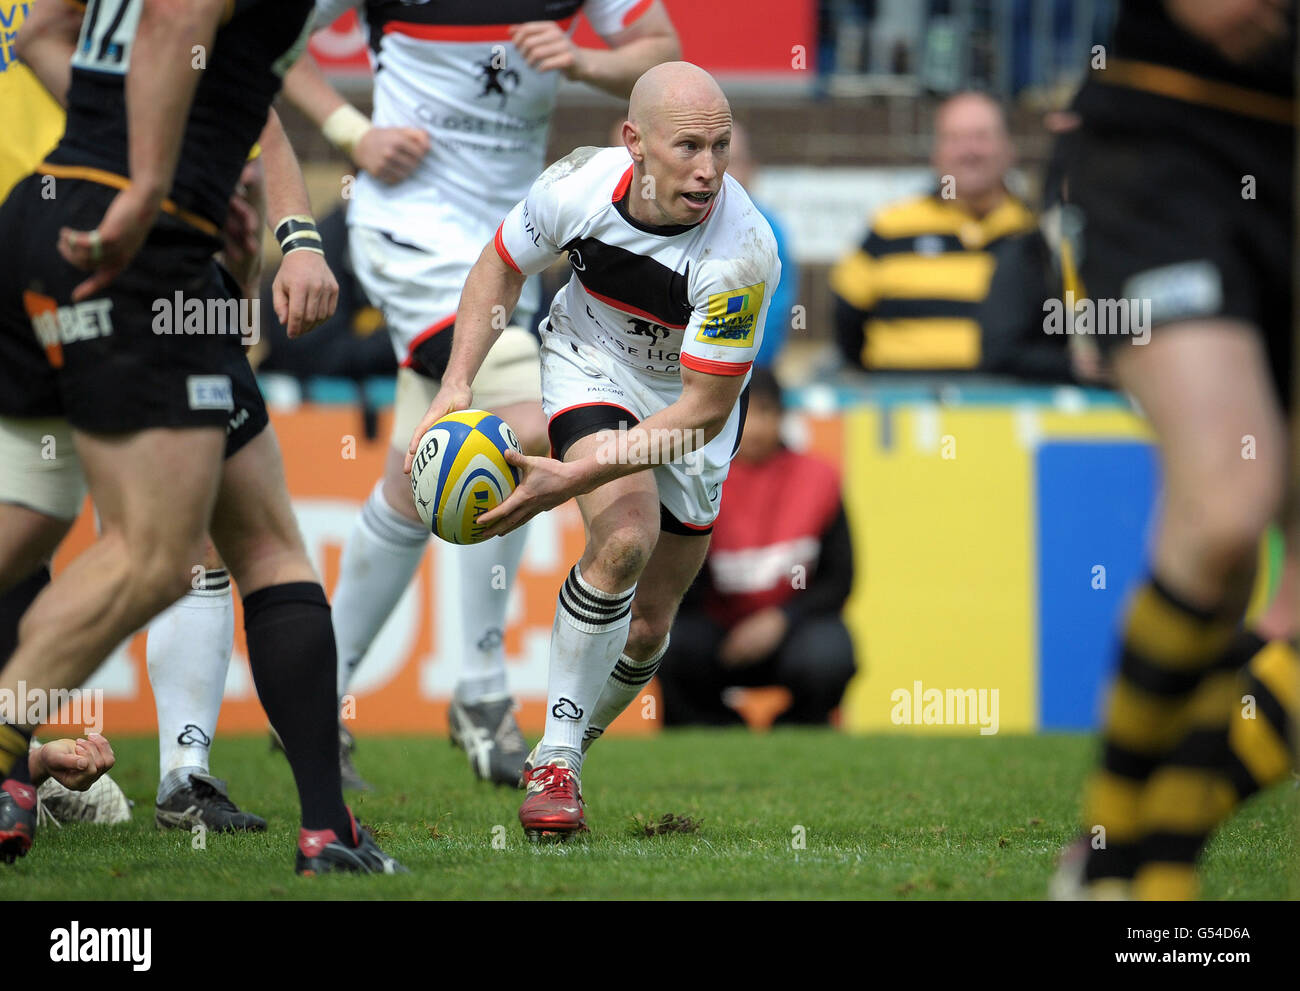 Rugby Union - Aviva Premiership - London Wasps v Newcastle Falcons - Adams Park. Newcastle's Peter Stringer during the Aviva Premiership match at Adams Park, High Wycombe. Stock Photo